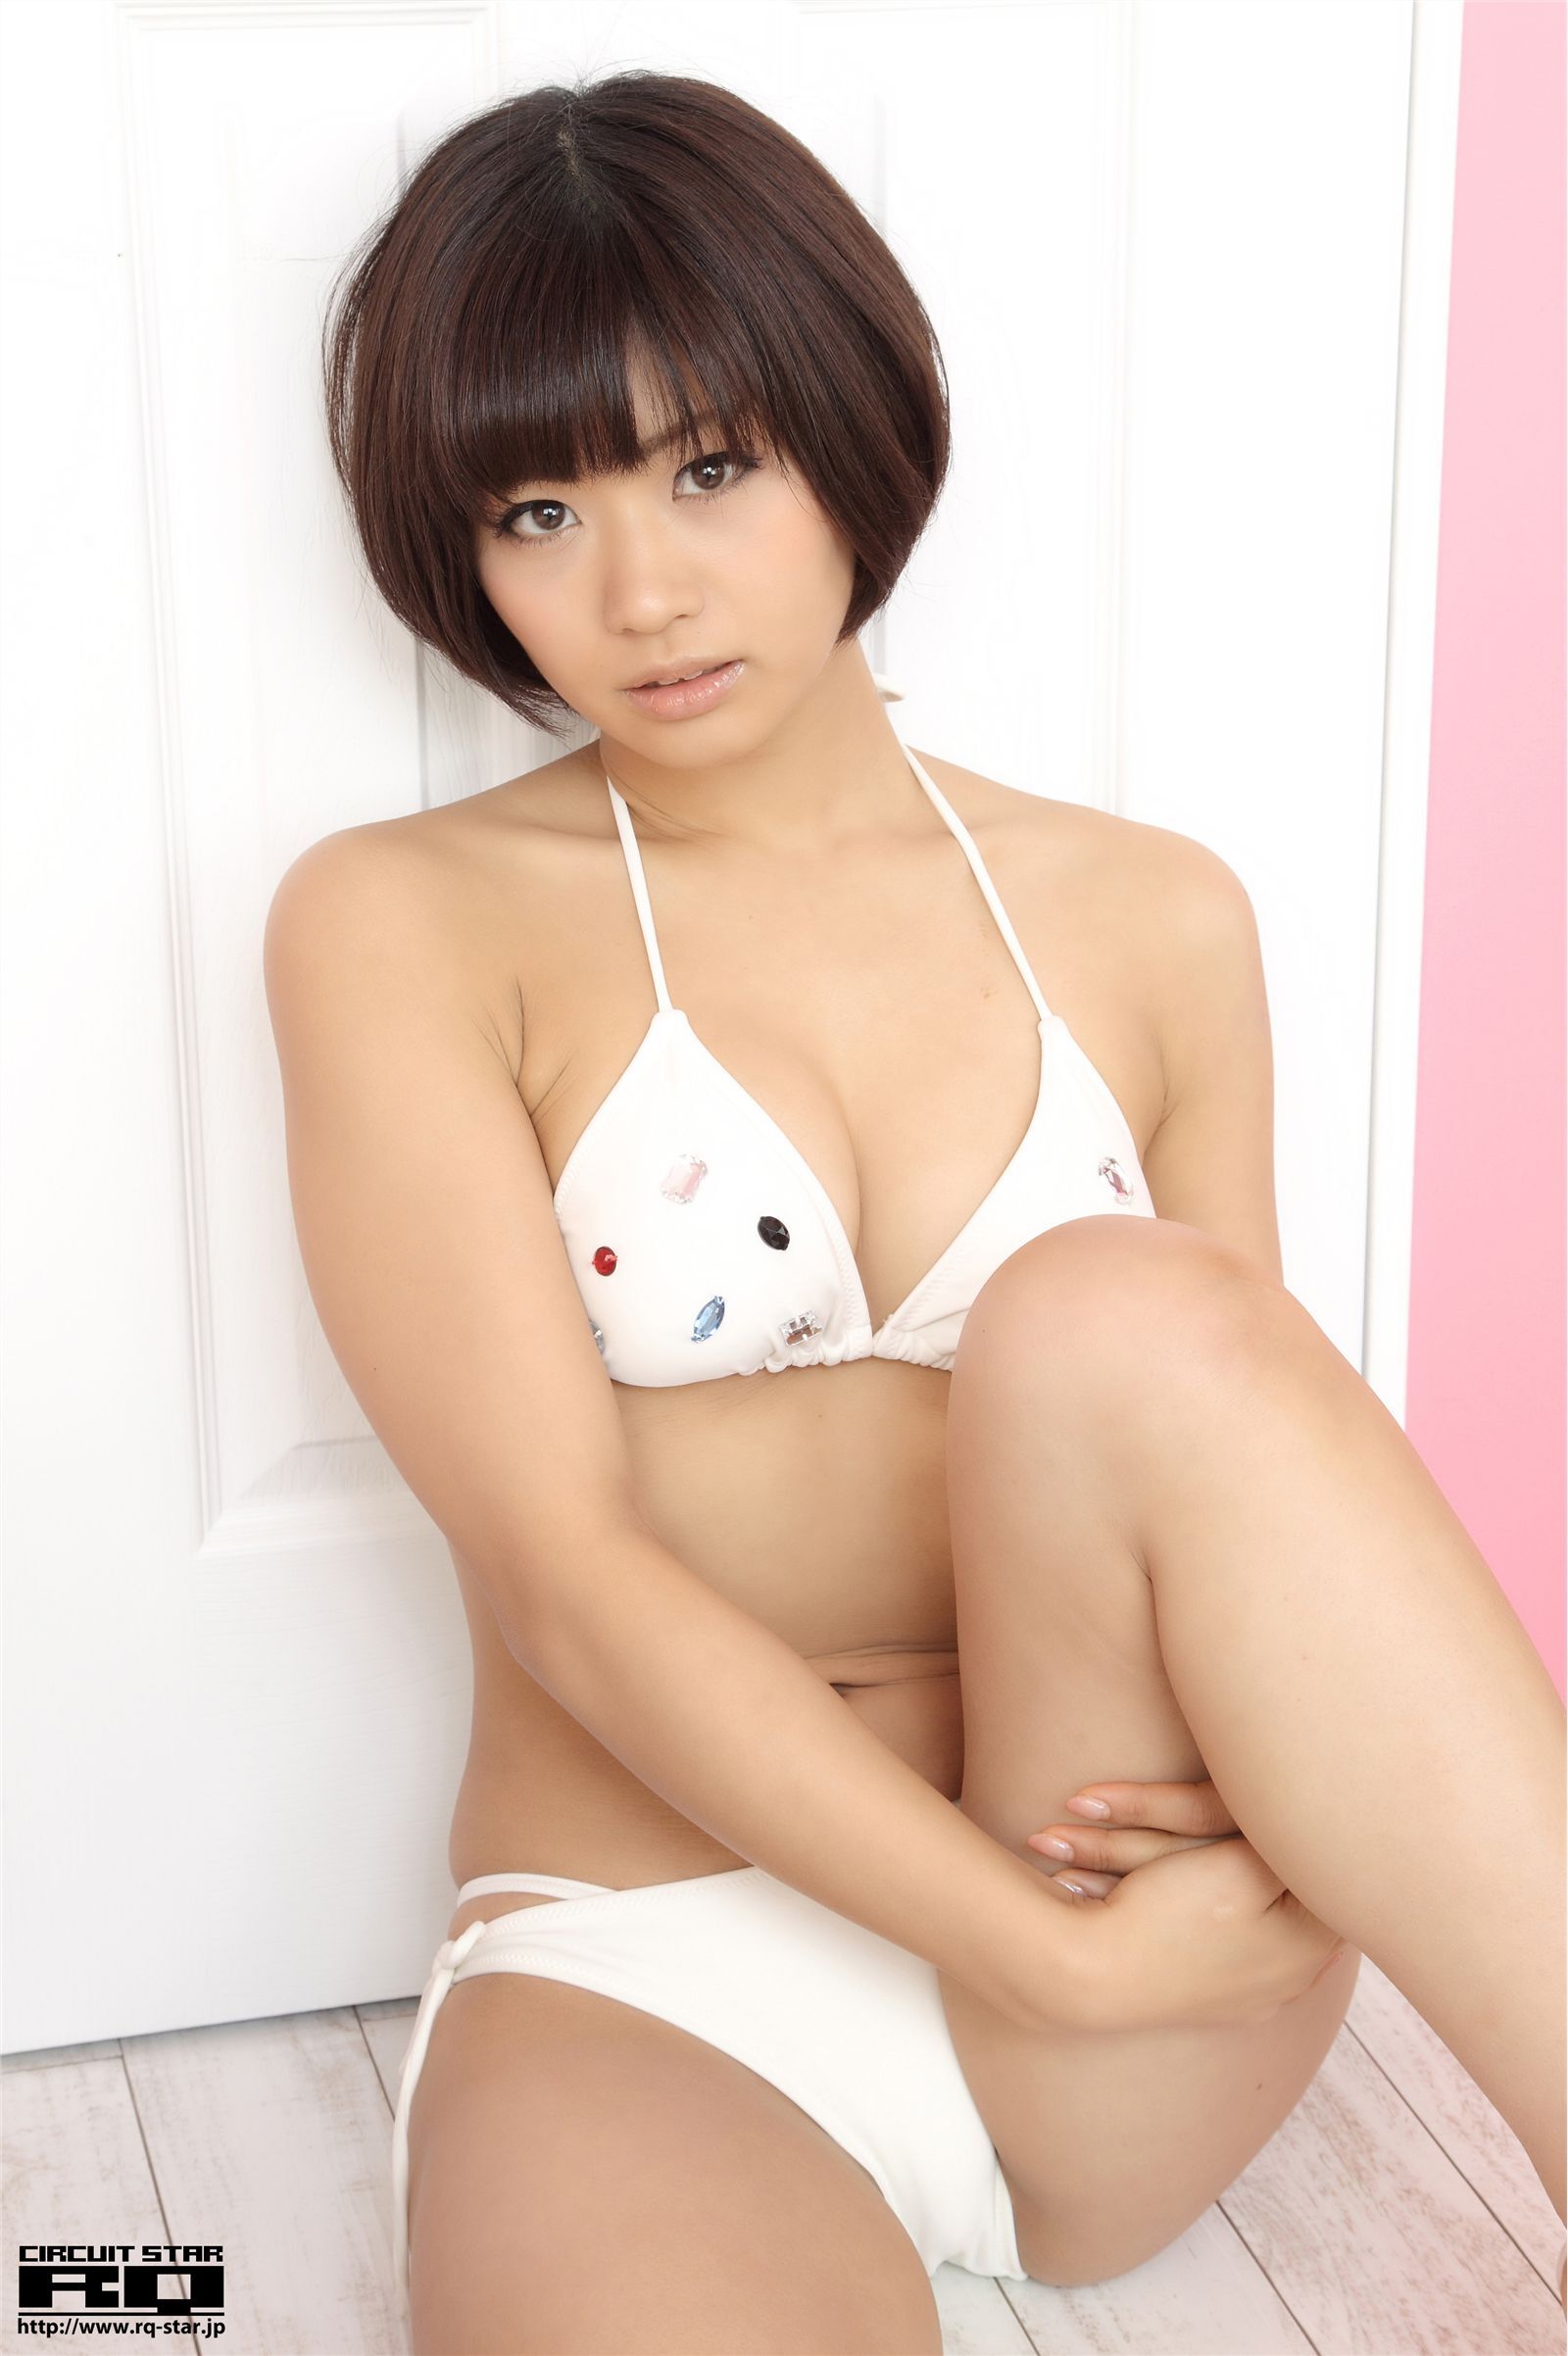 An Zhitong [rq-star] 2012.03.02no.00609 high definition photo of Japanese beauty model